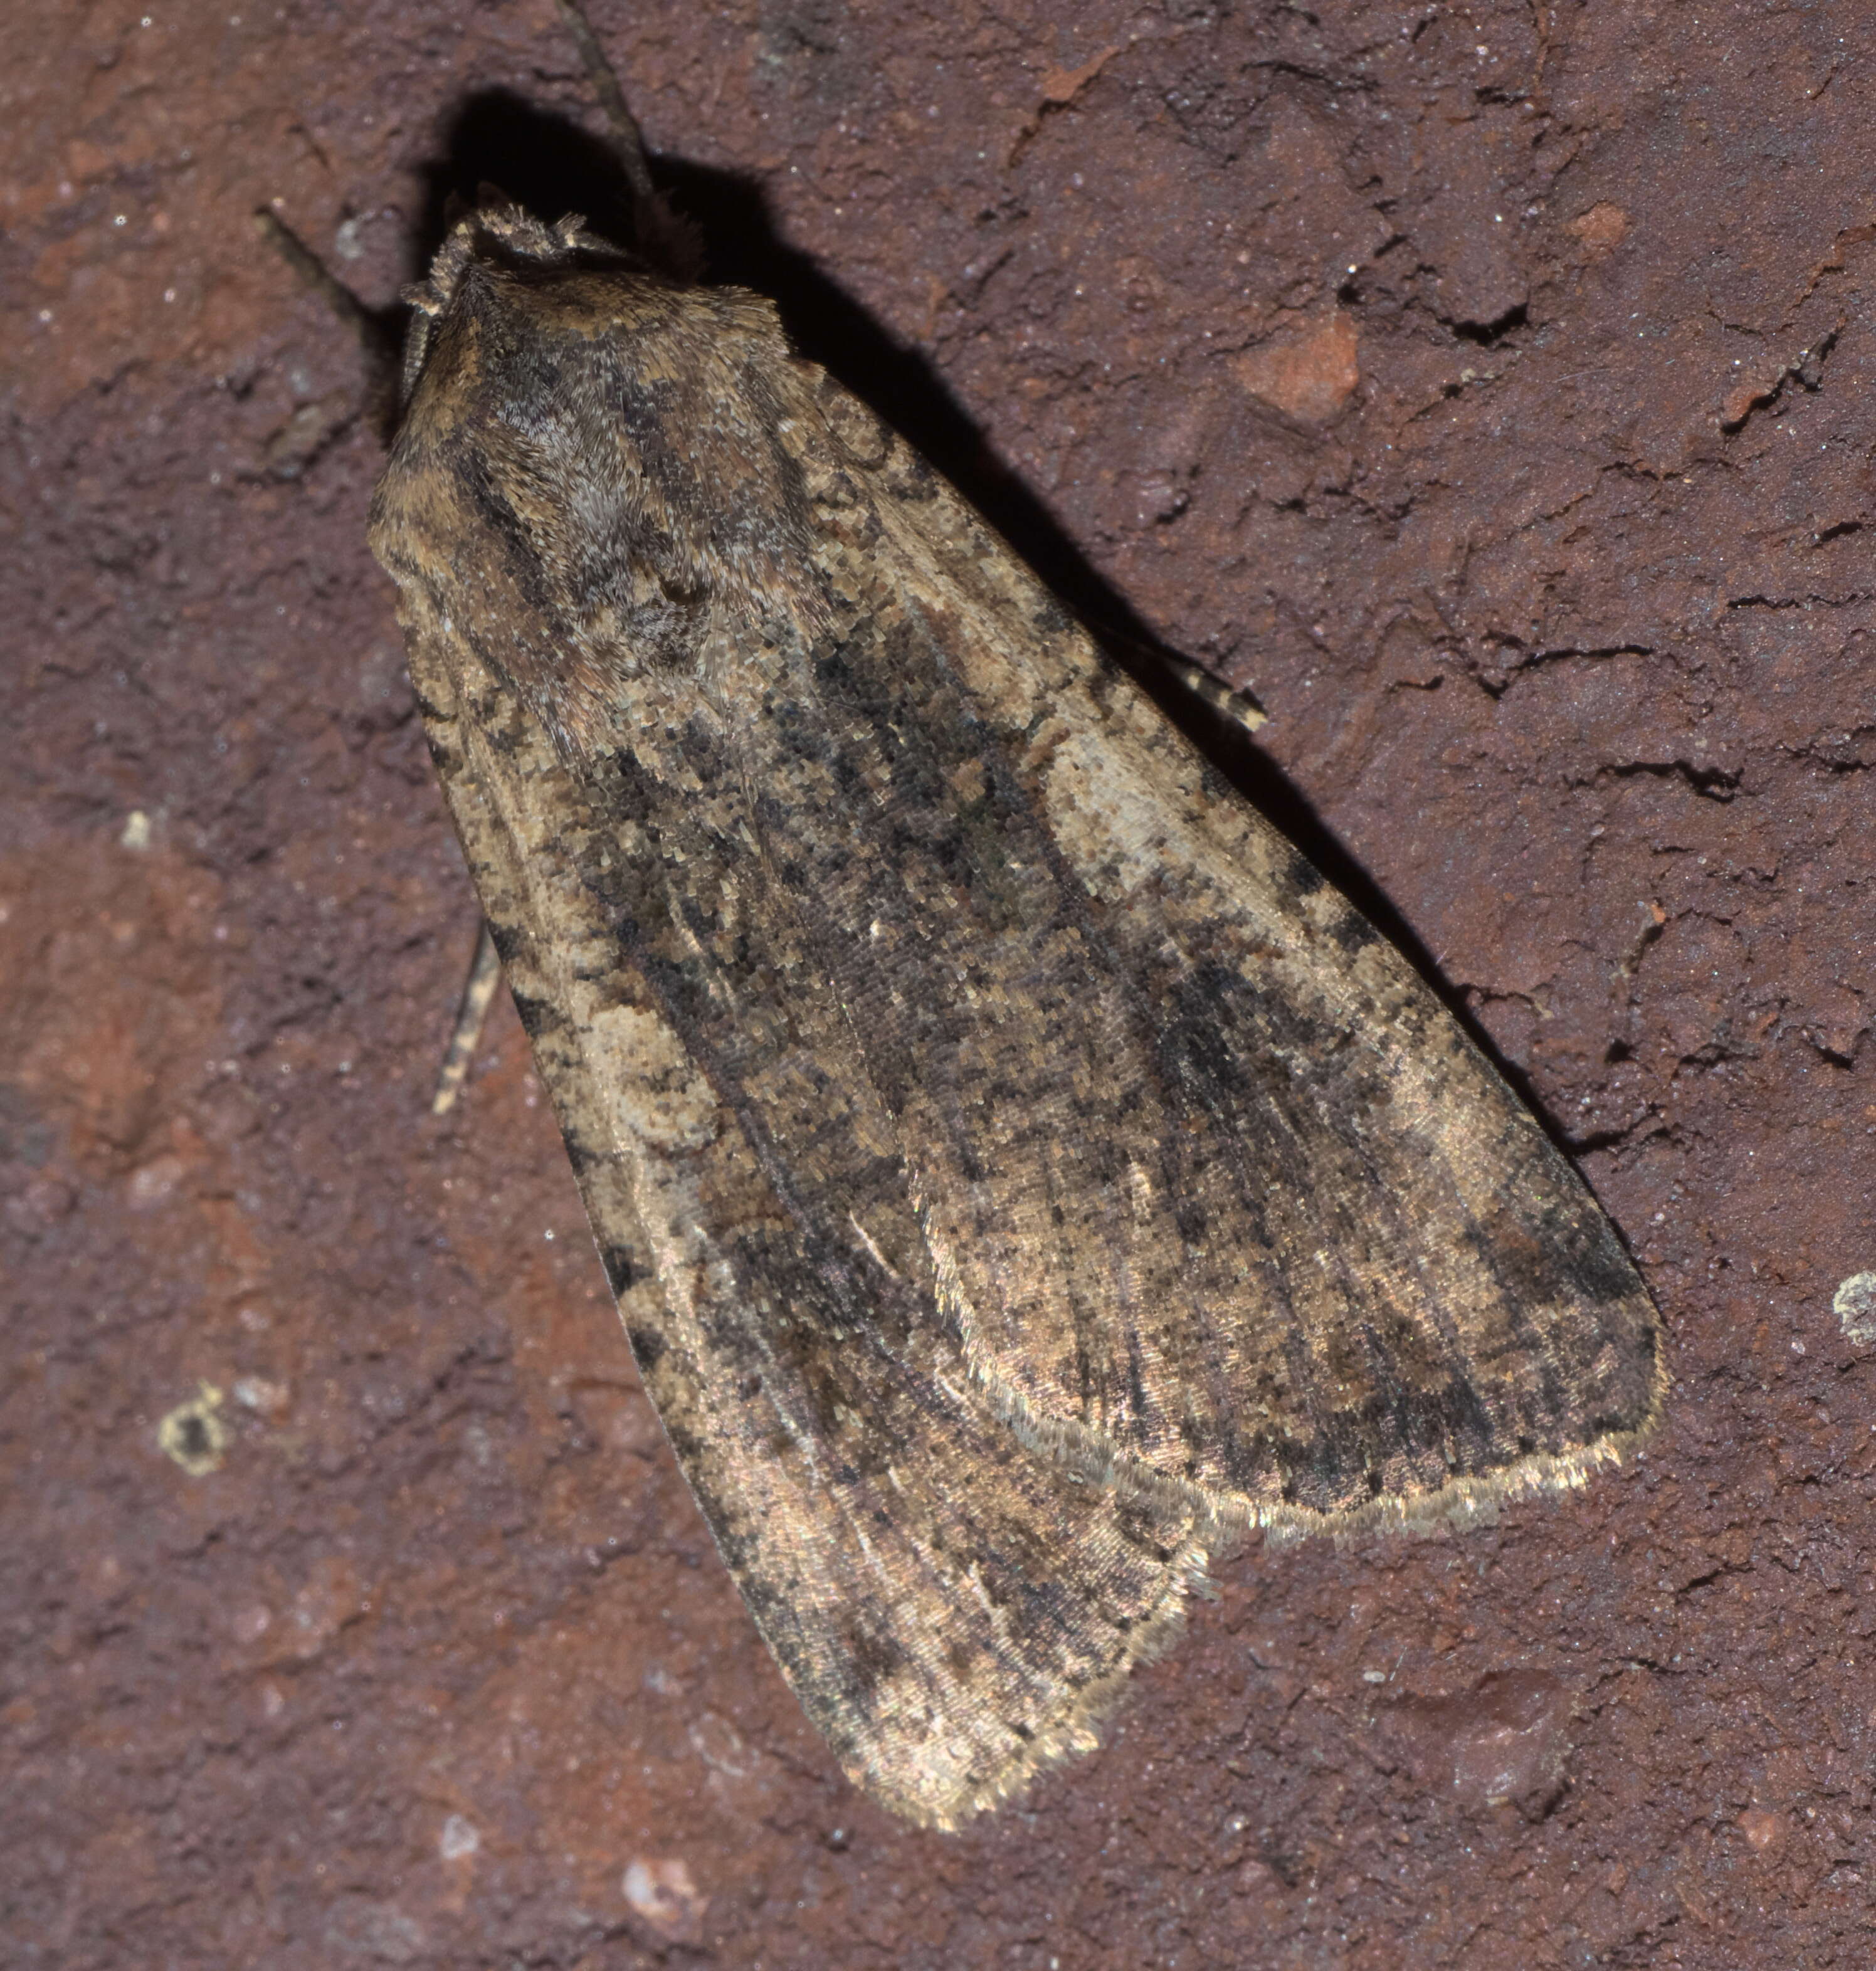 Image of pearly underwing